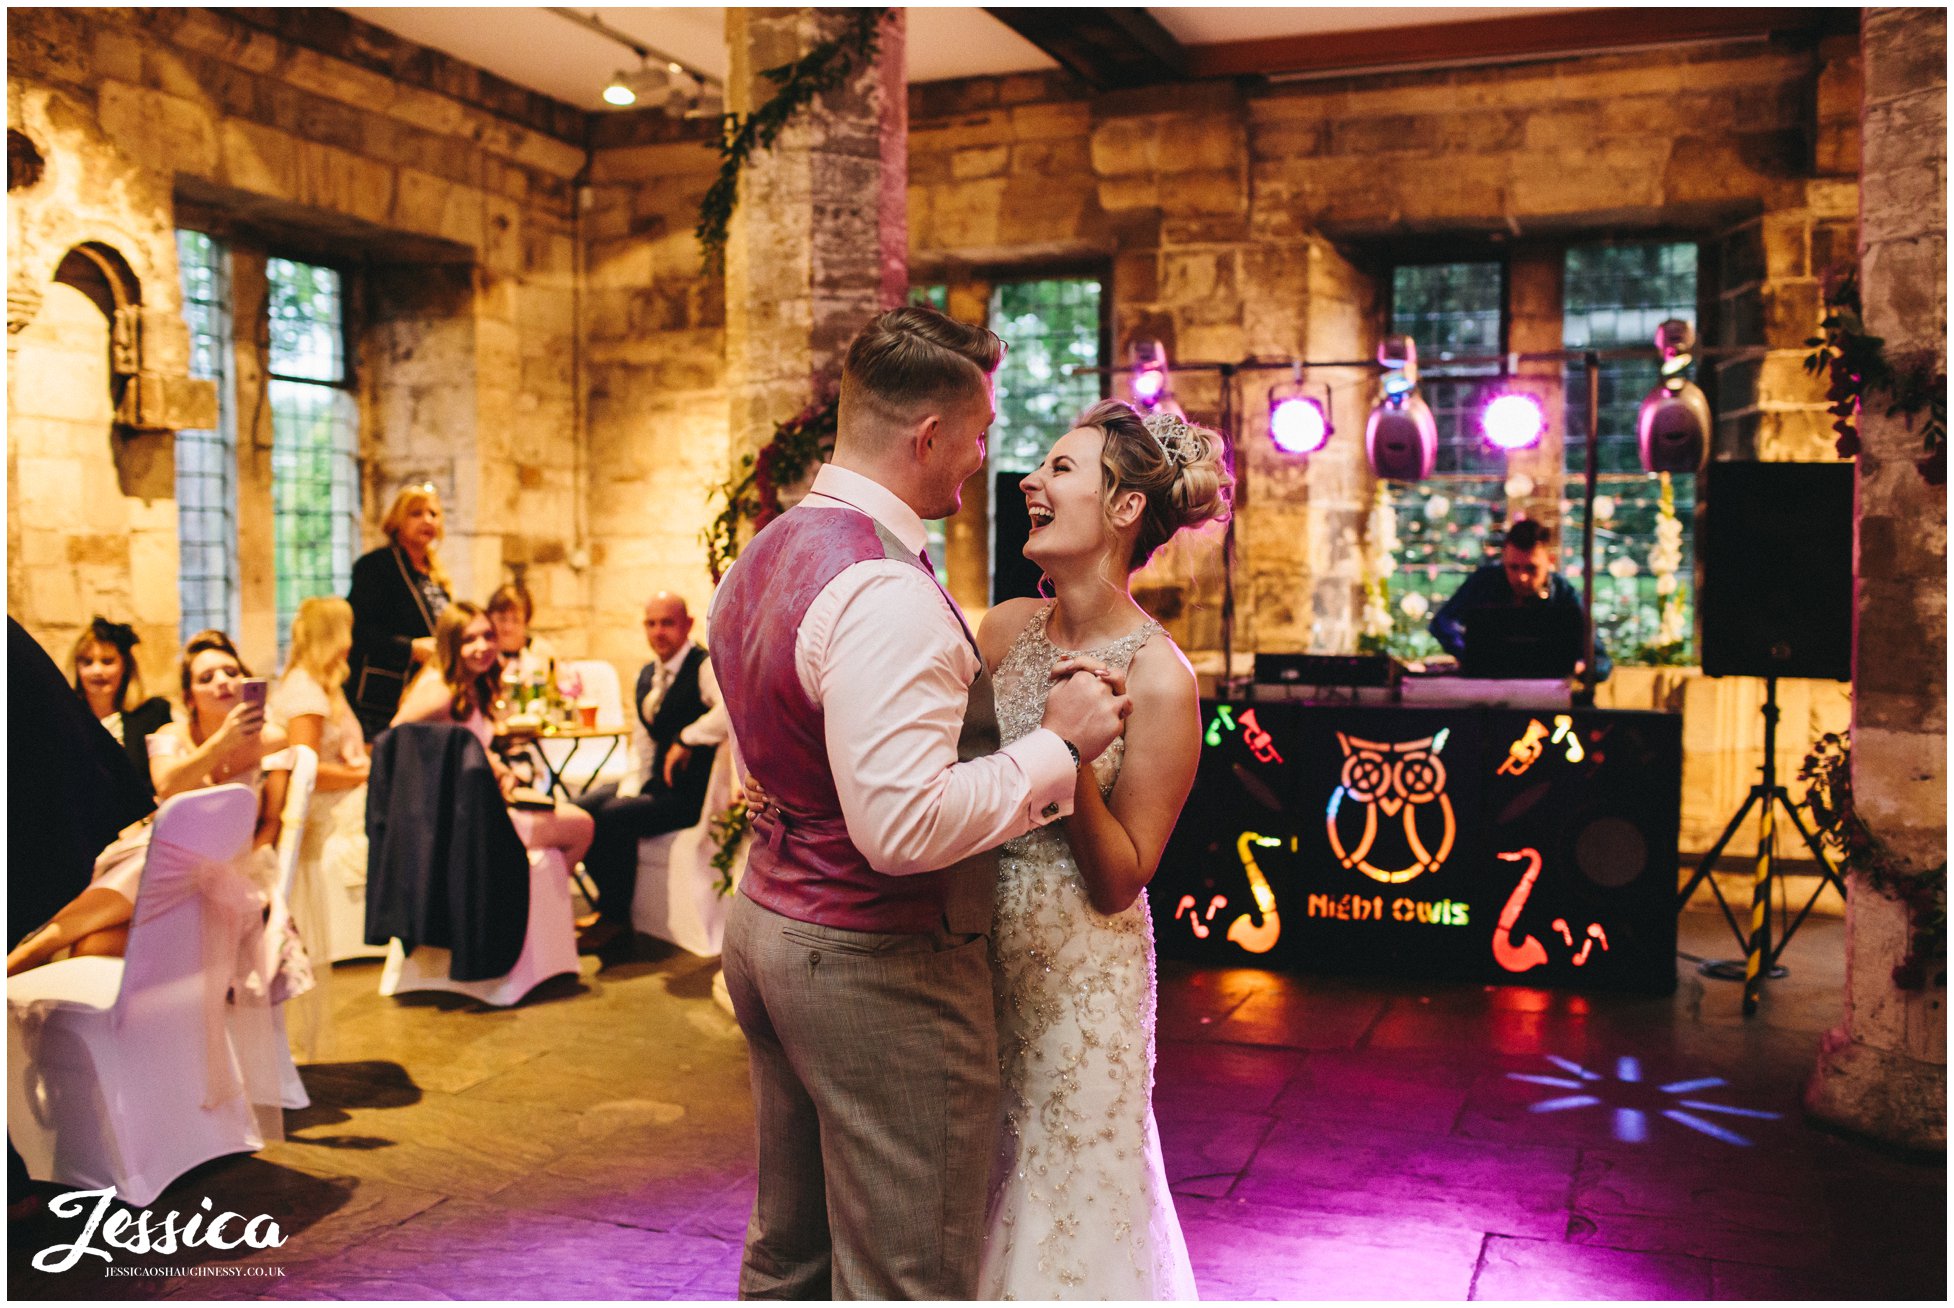 newly wed's share their first dance together at the hospitium